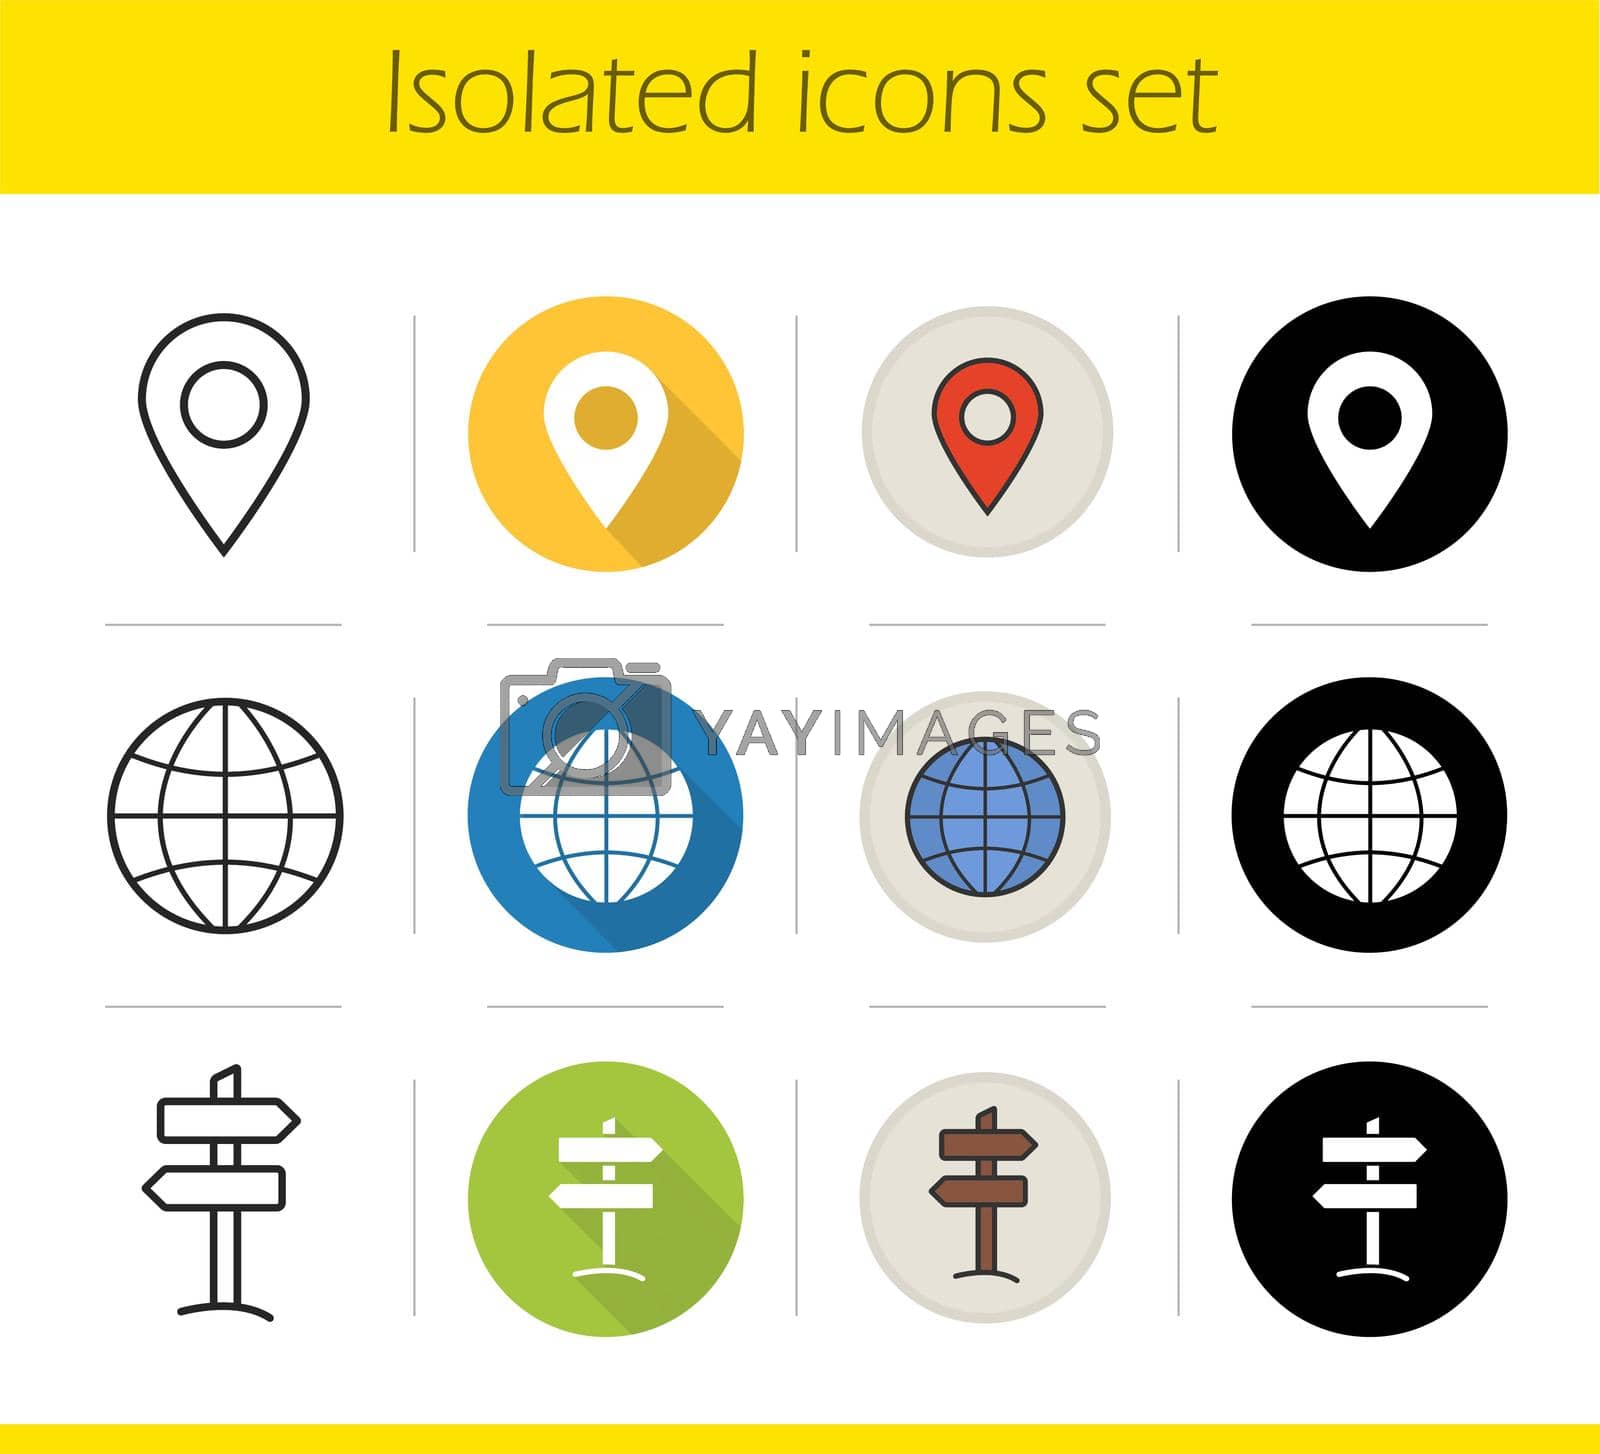 Travelling icons set. Flat design, linear, black and color styles. Geolocation mark, globe symbol, wooden way direction. Tourism isolated vector illustrations